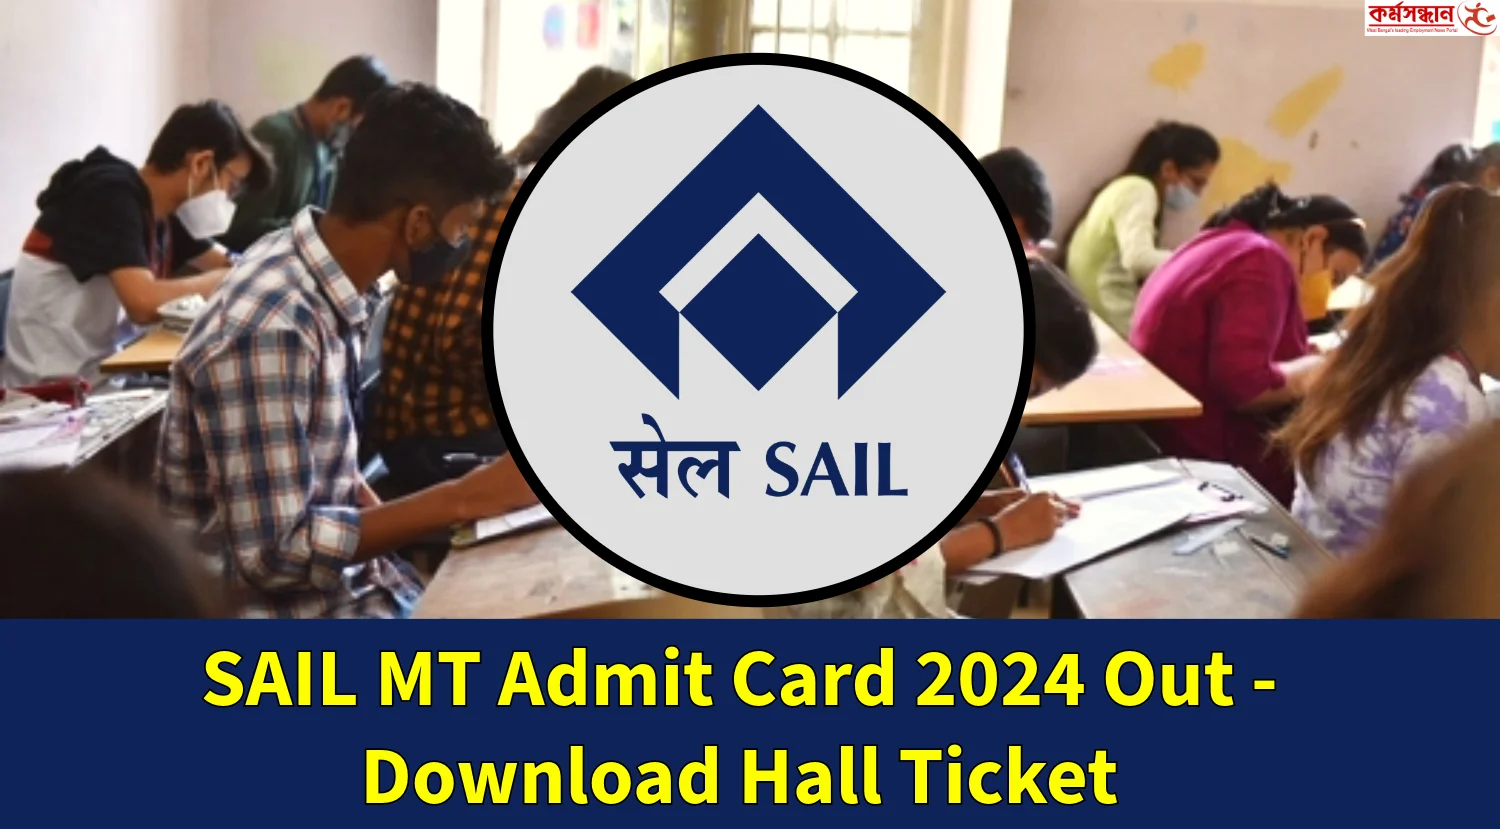 SAIL MT Admit Card 2024 Out - Download Hall Ticket Now